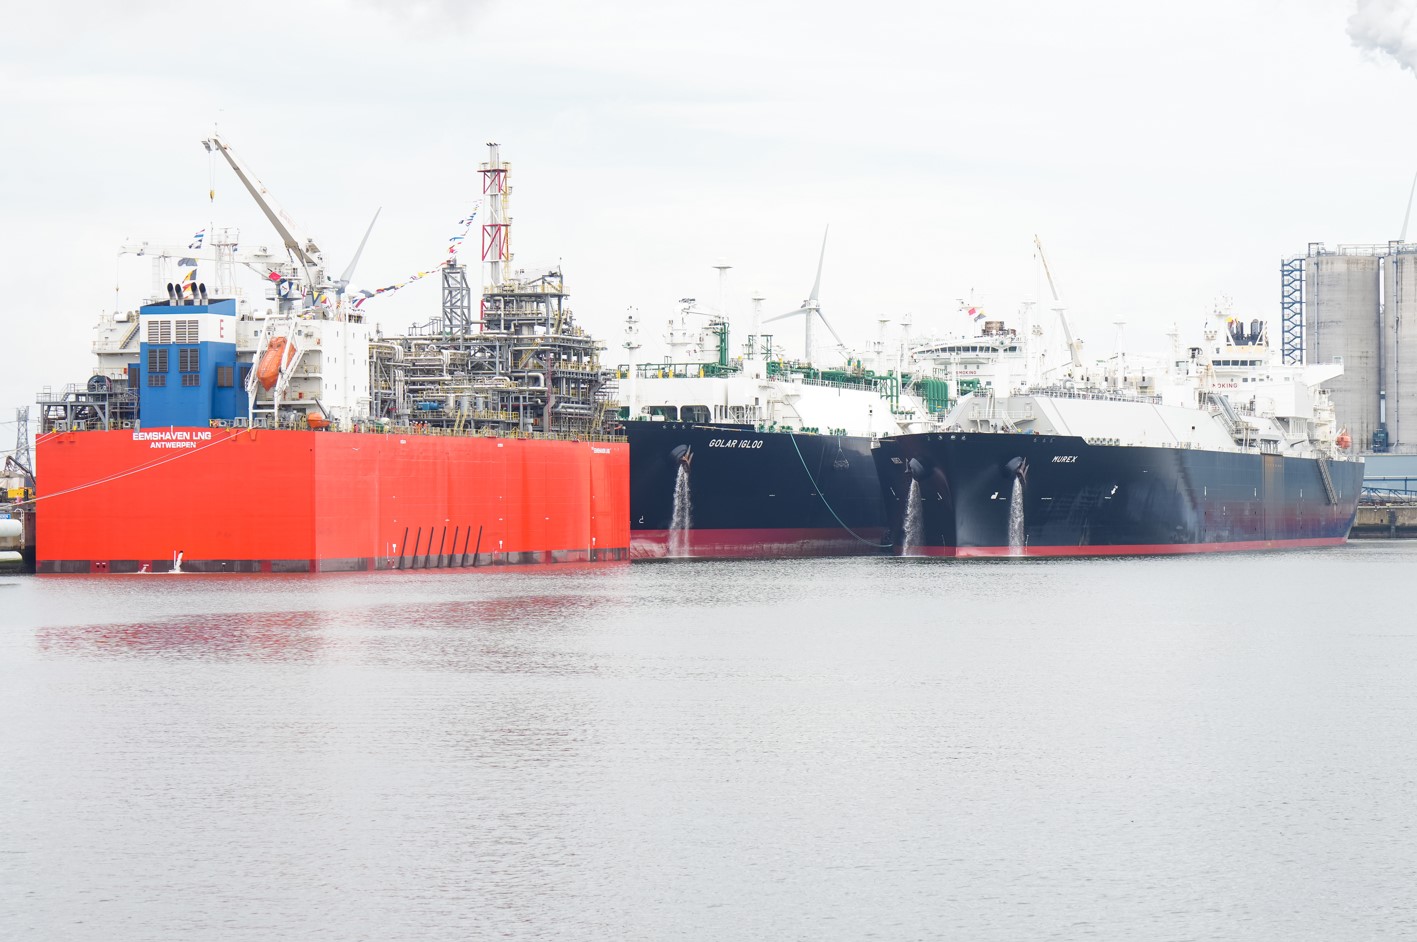 Gasunie now expects to wrap up Eemshaven LNG work this week